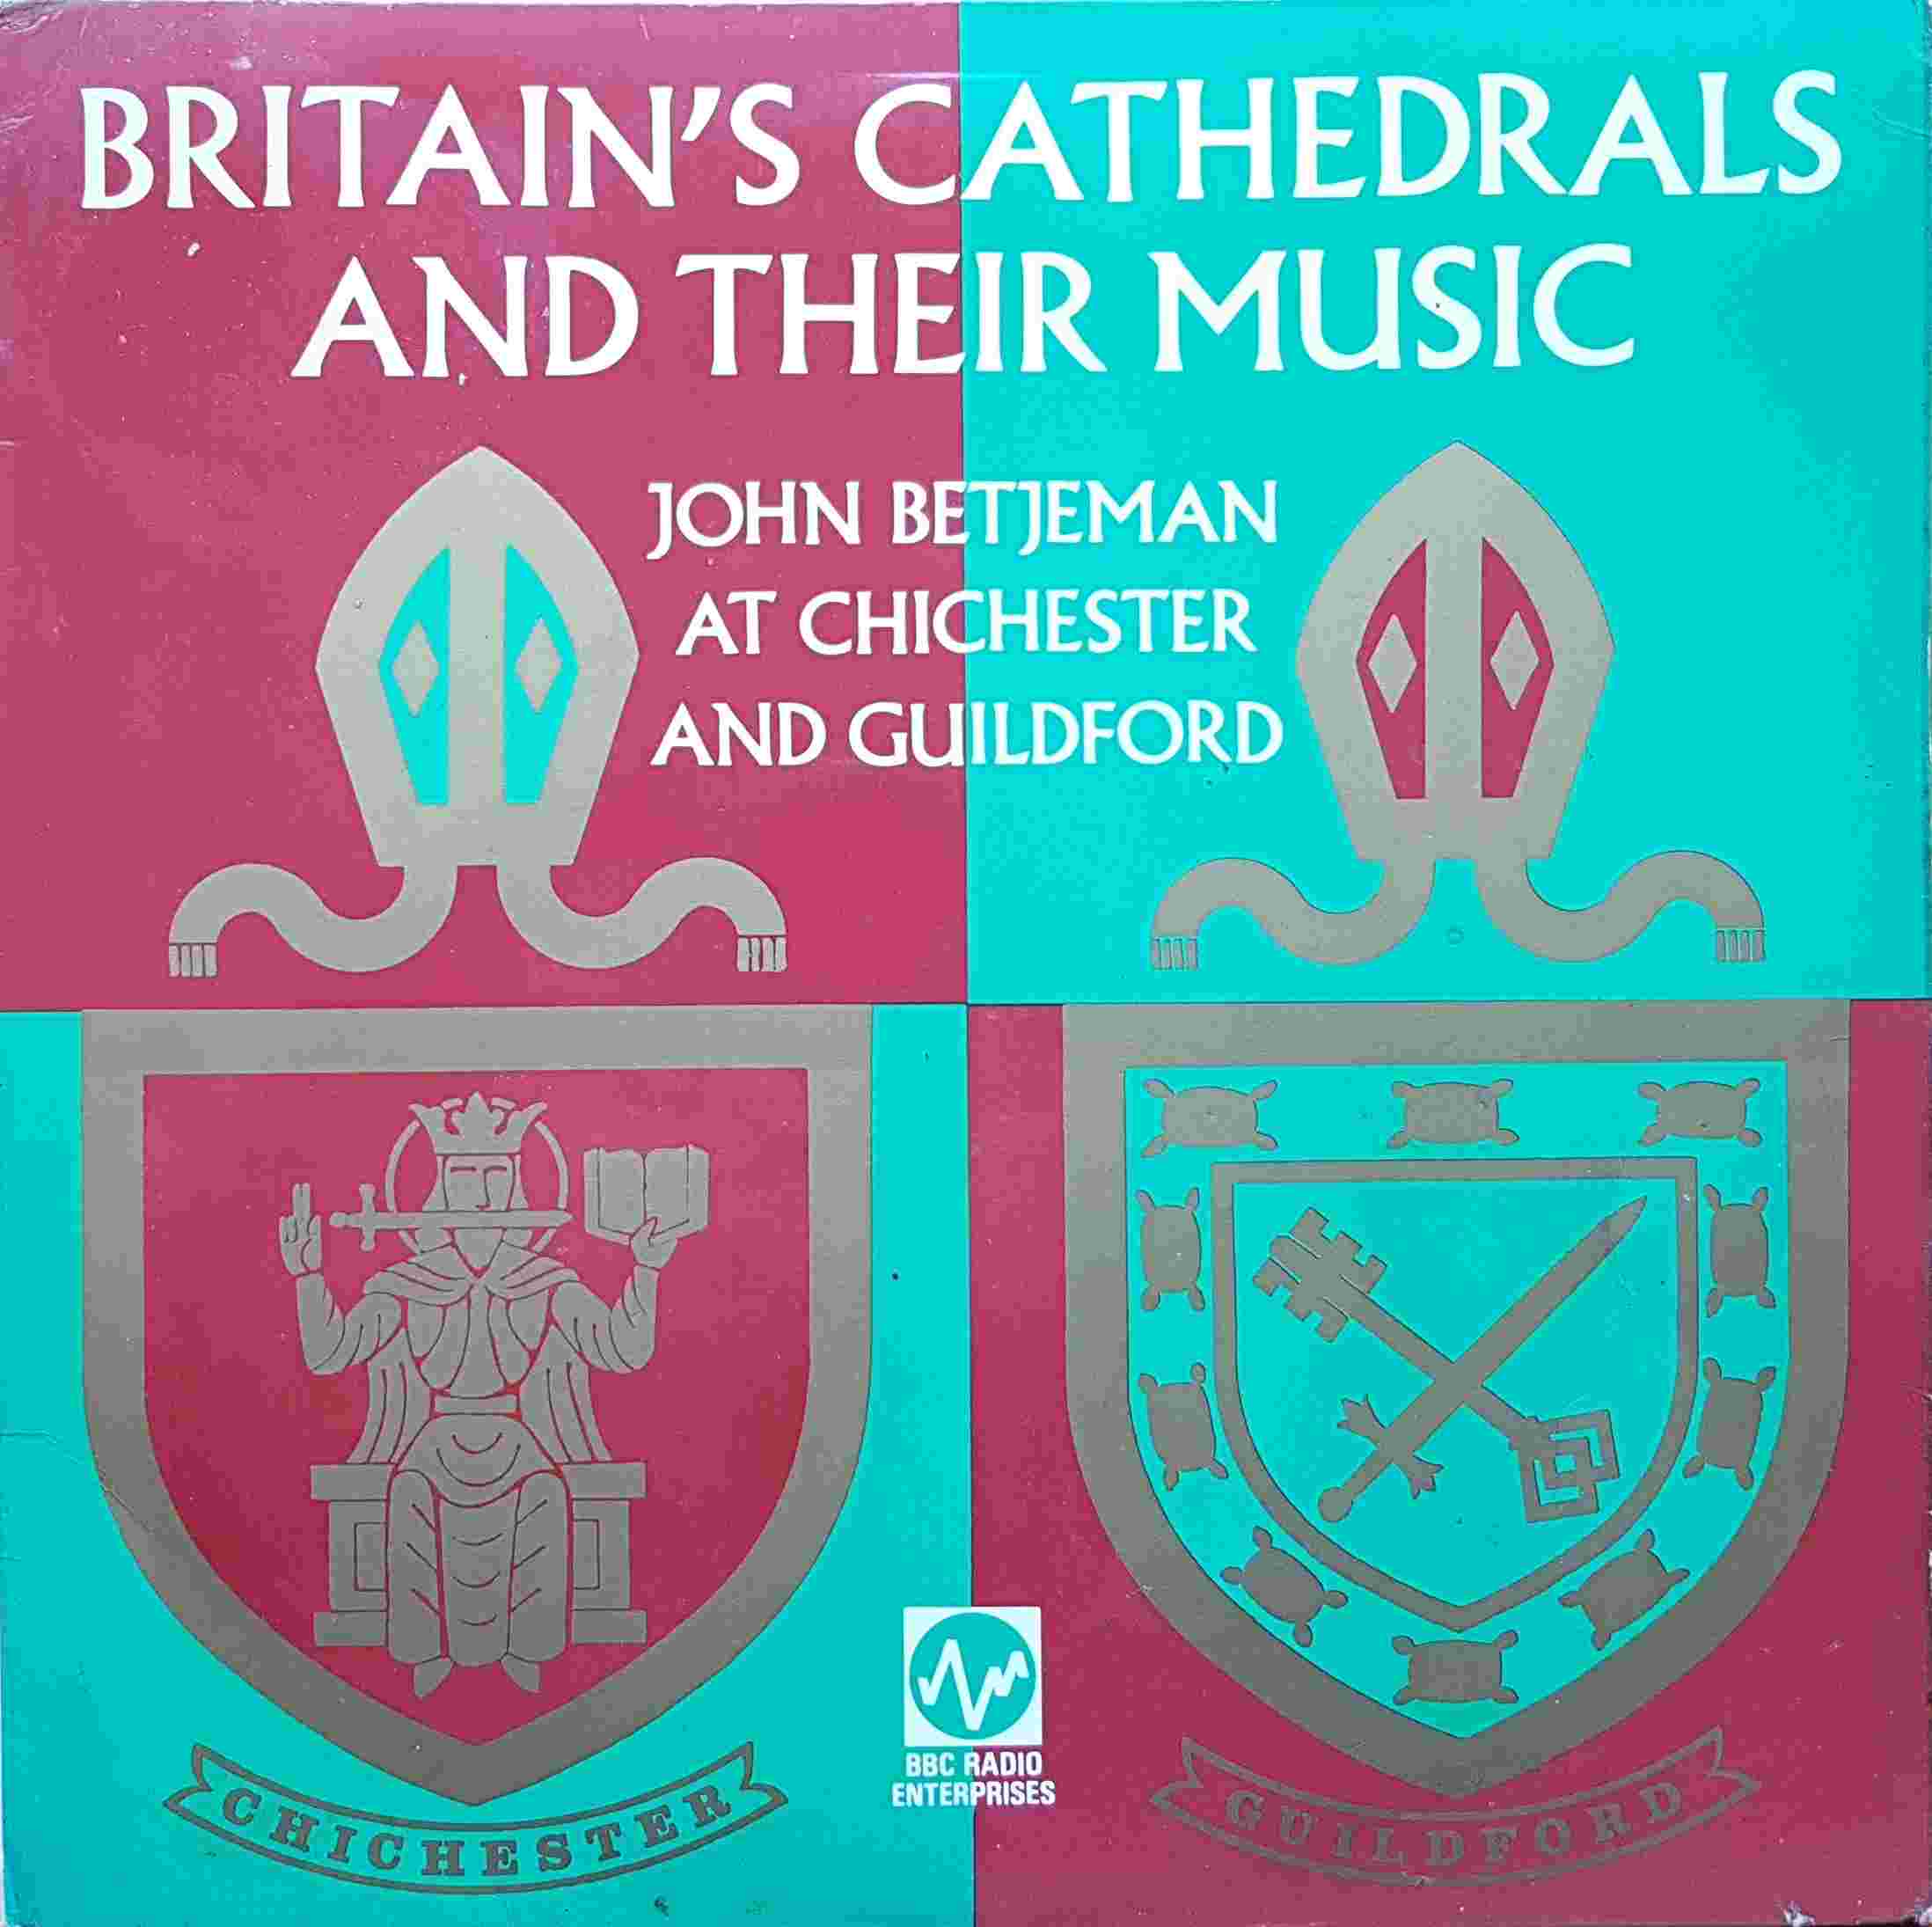 Picture of Britain's cathedrals and their music by artist John Betjeman from the BBC albums - Records and Tapes library